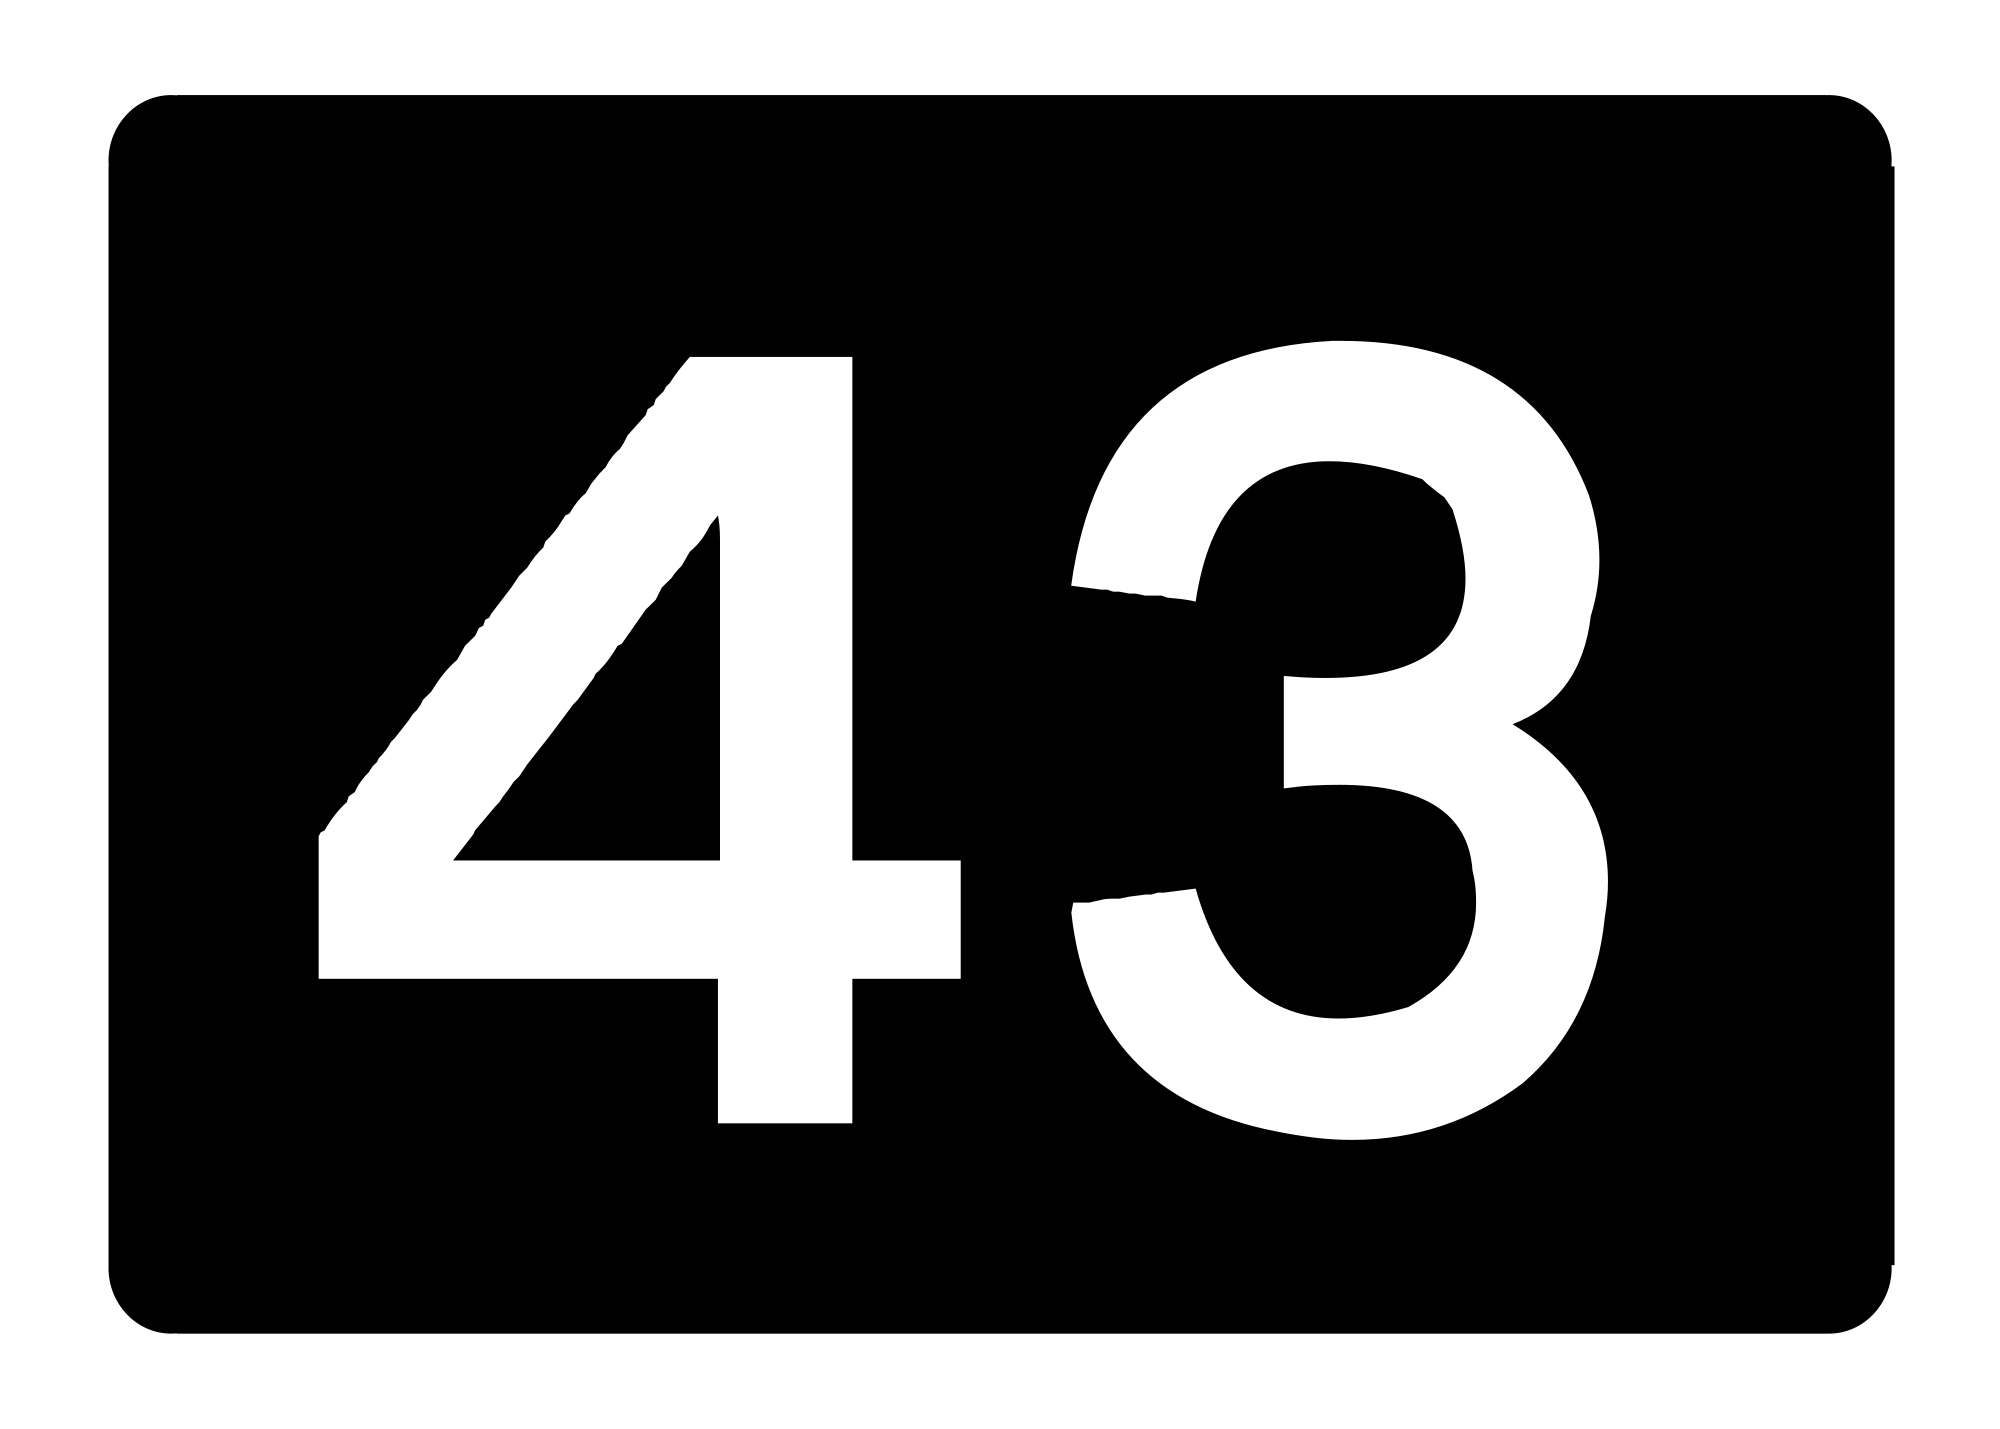 File:Junction 43.svg - Wikimedia Commons